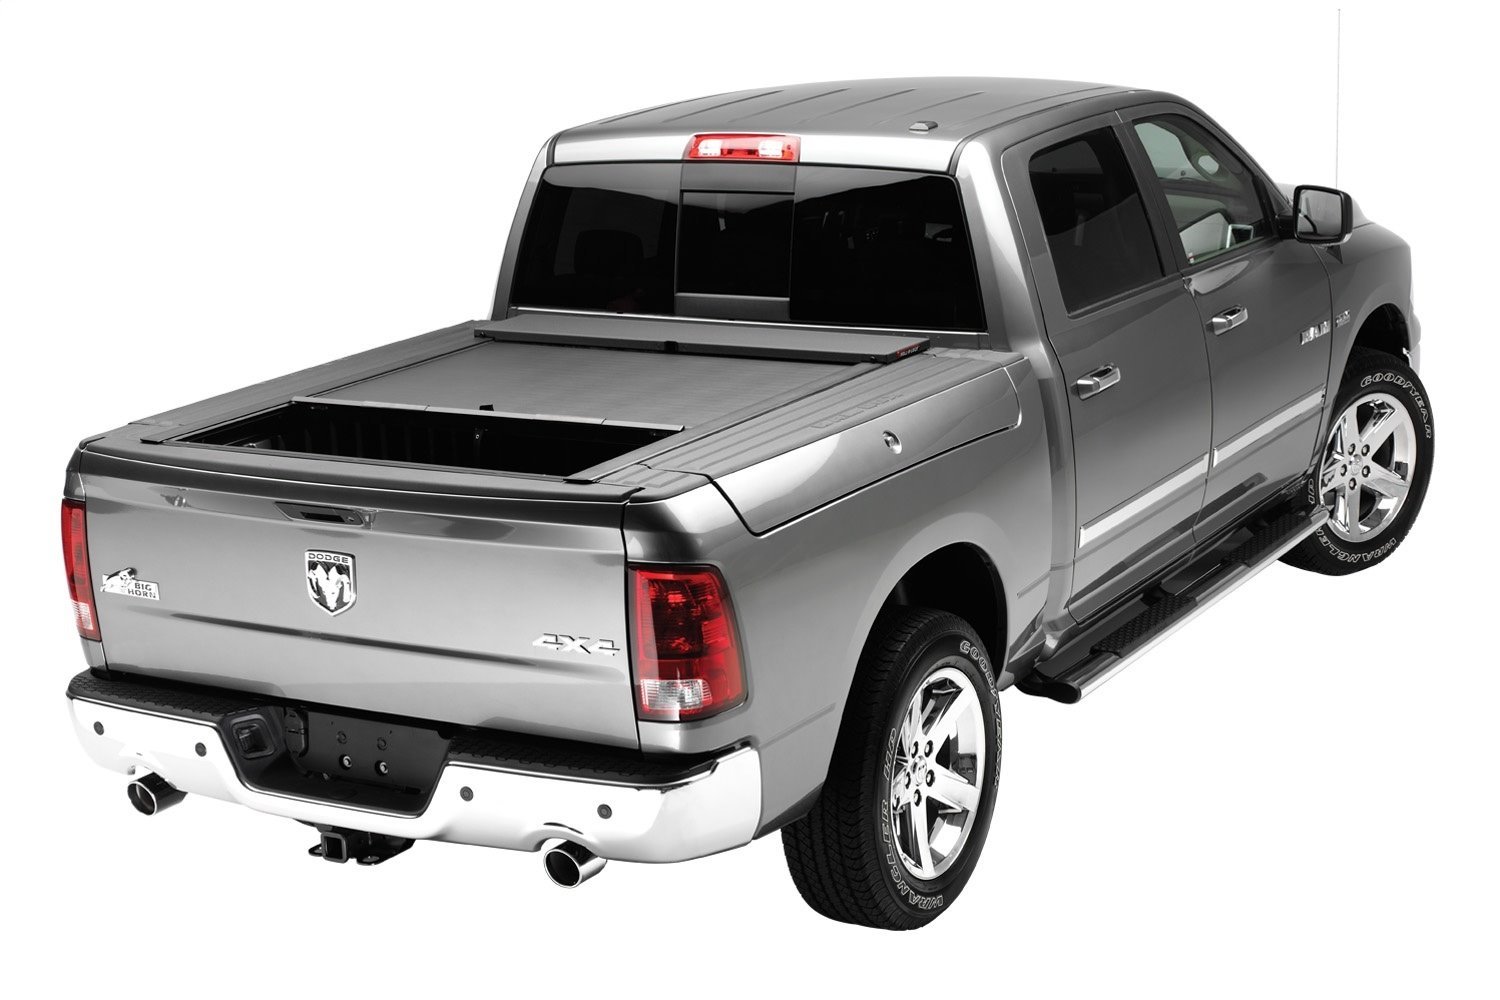 LG446M M-Series Locking Retractable Truck Bed Cover for 2009-2018 Dodge Ram 1500 w/RamBox [5.6 ft. Bed]